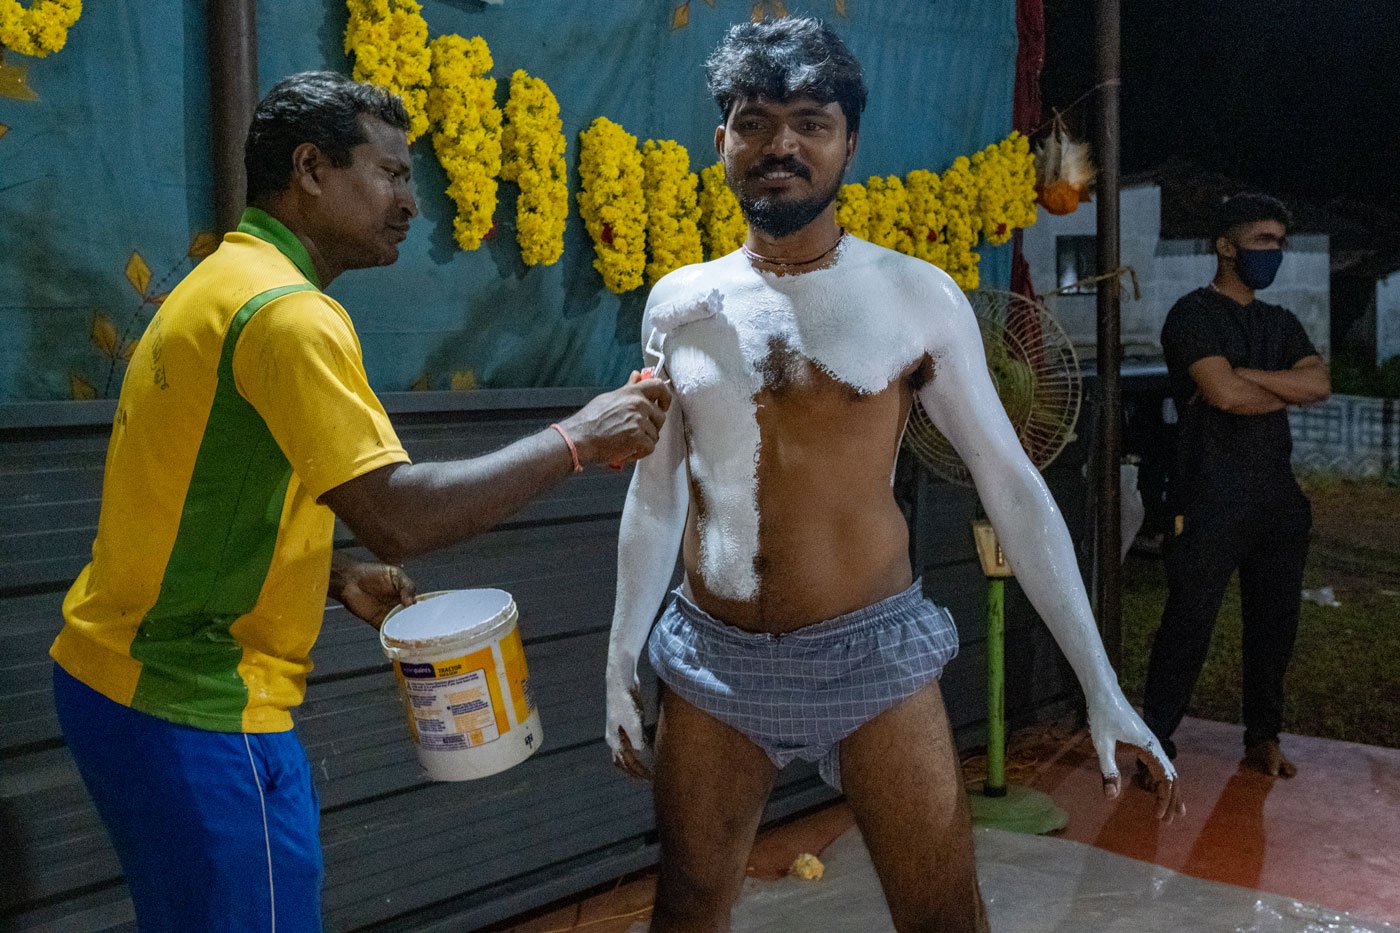 Ramzan paints Ashwith Poojari ahead of the performance. A clay model artist by profession, Ramzan lends a hand to performances during the season